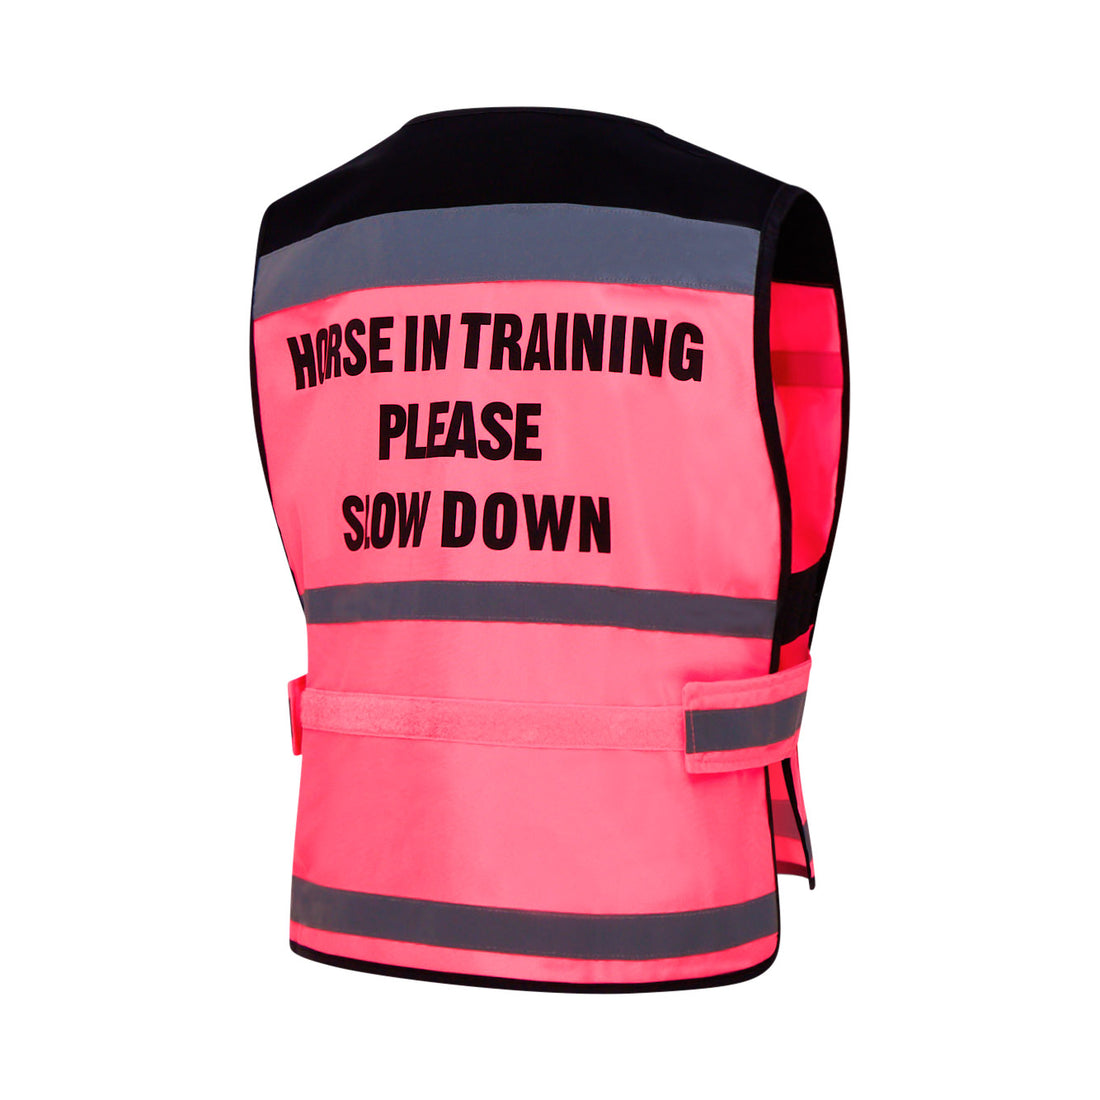 Equisafety Waistcoat Horse In Training Please Slow Down Pink